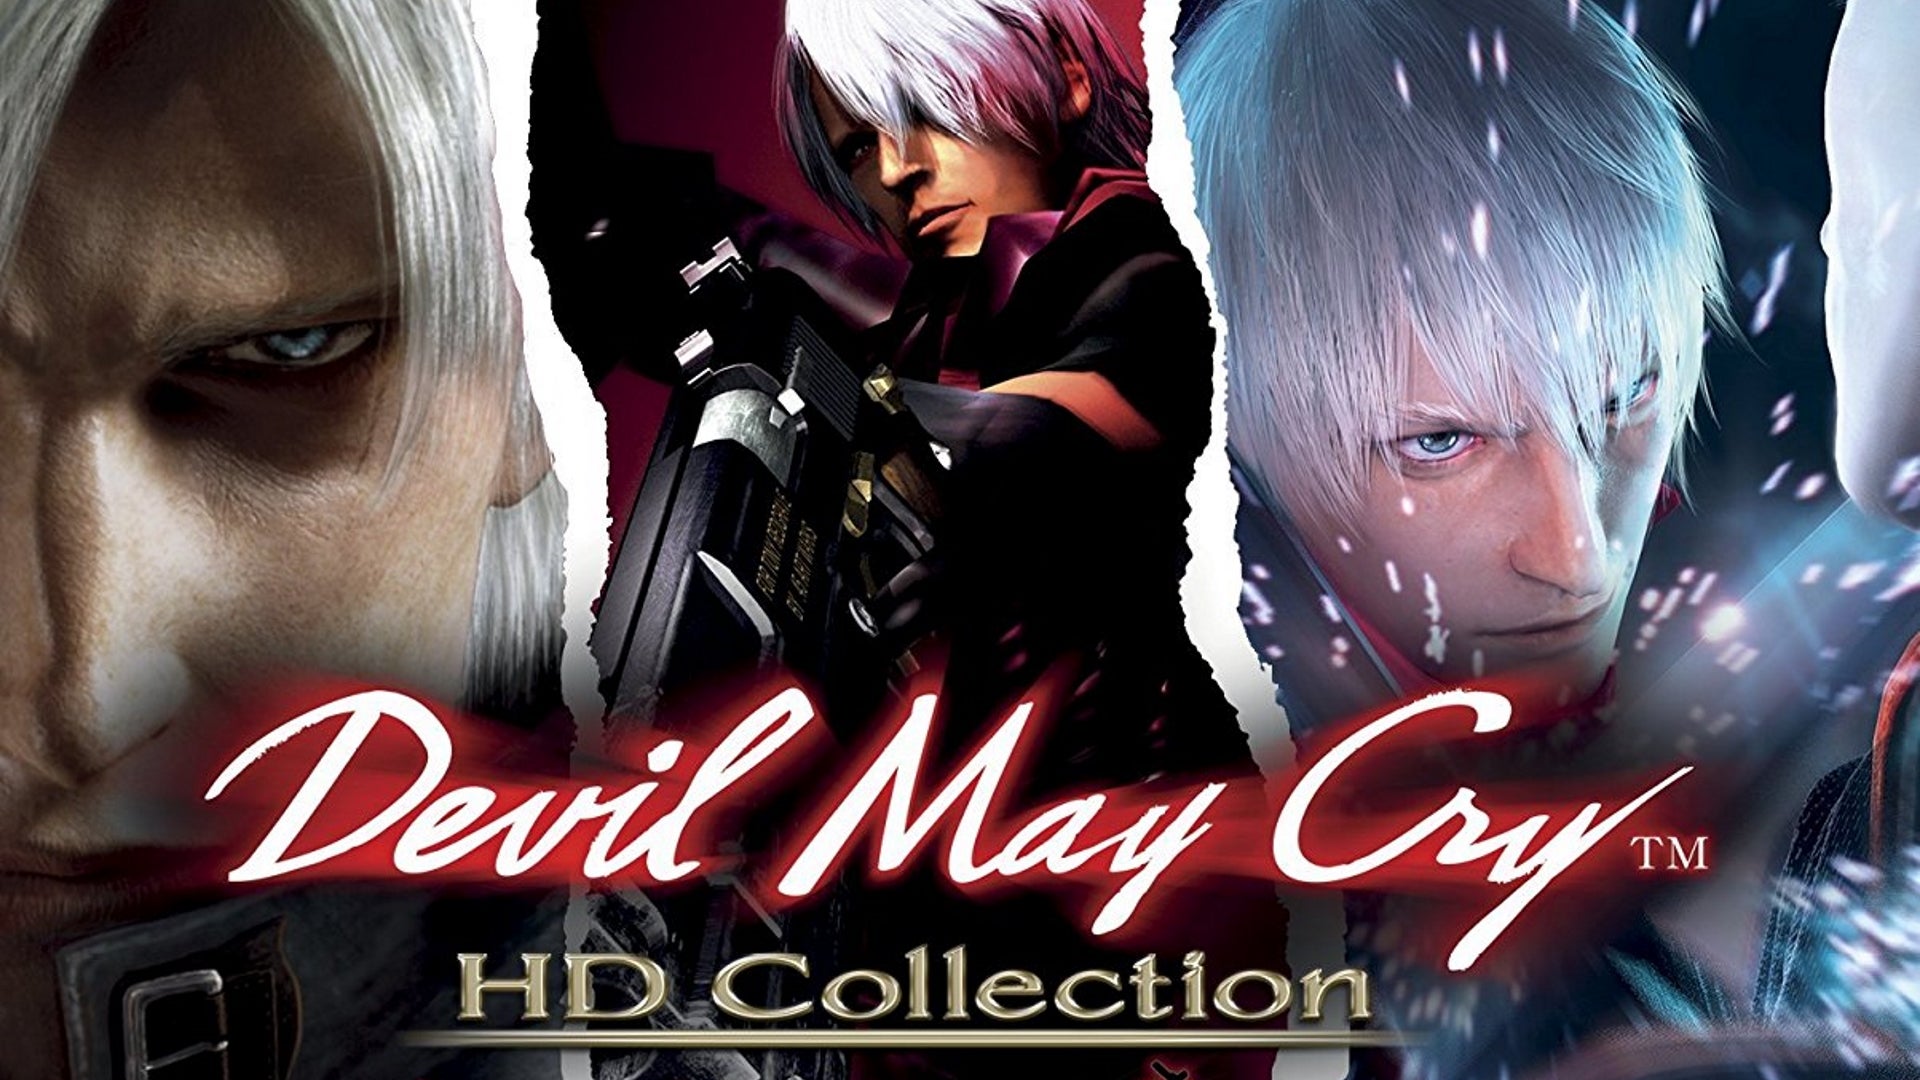 gennembore Mening symmetri Devil May Cry HD Collection Review | Trusted Reviews